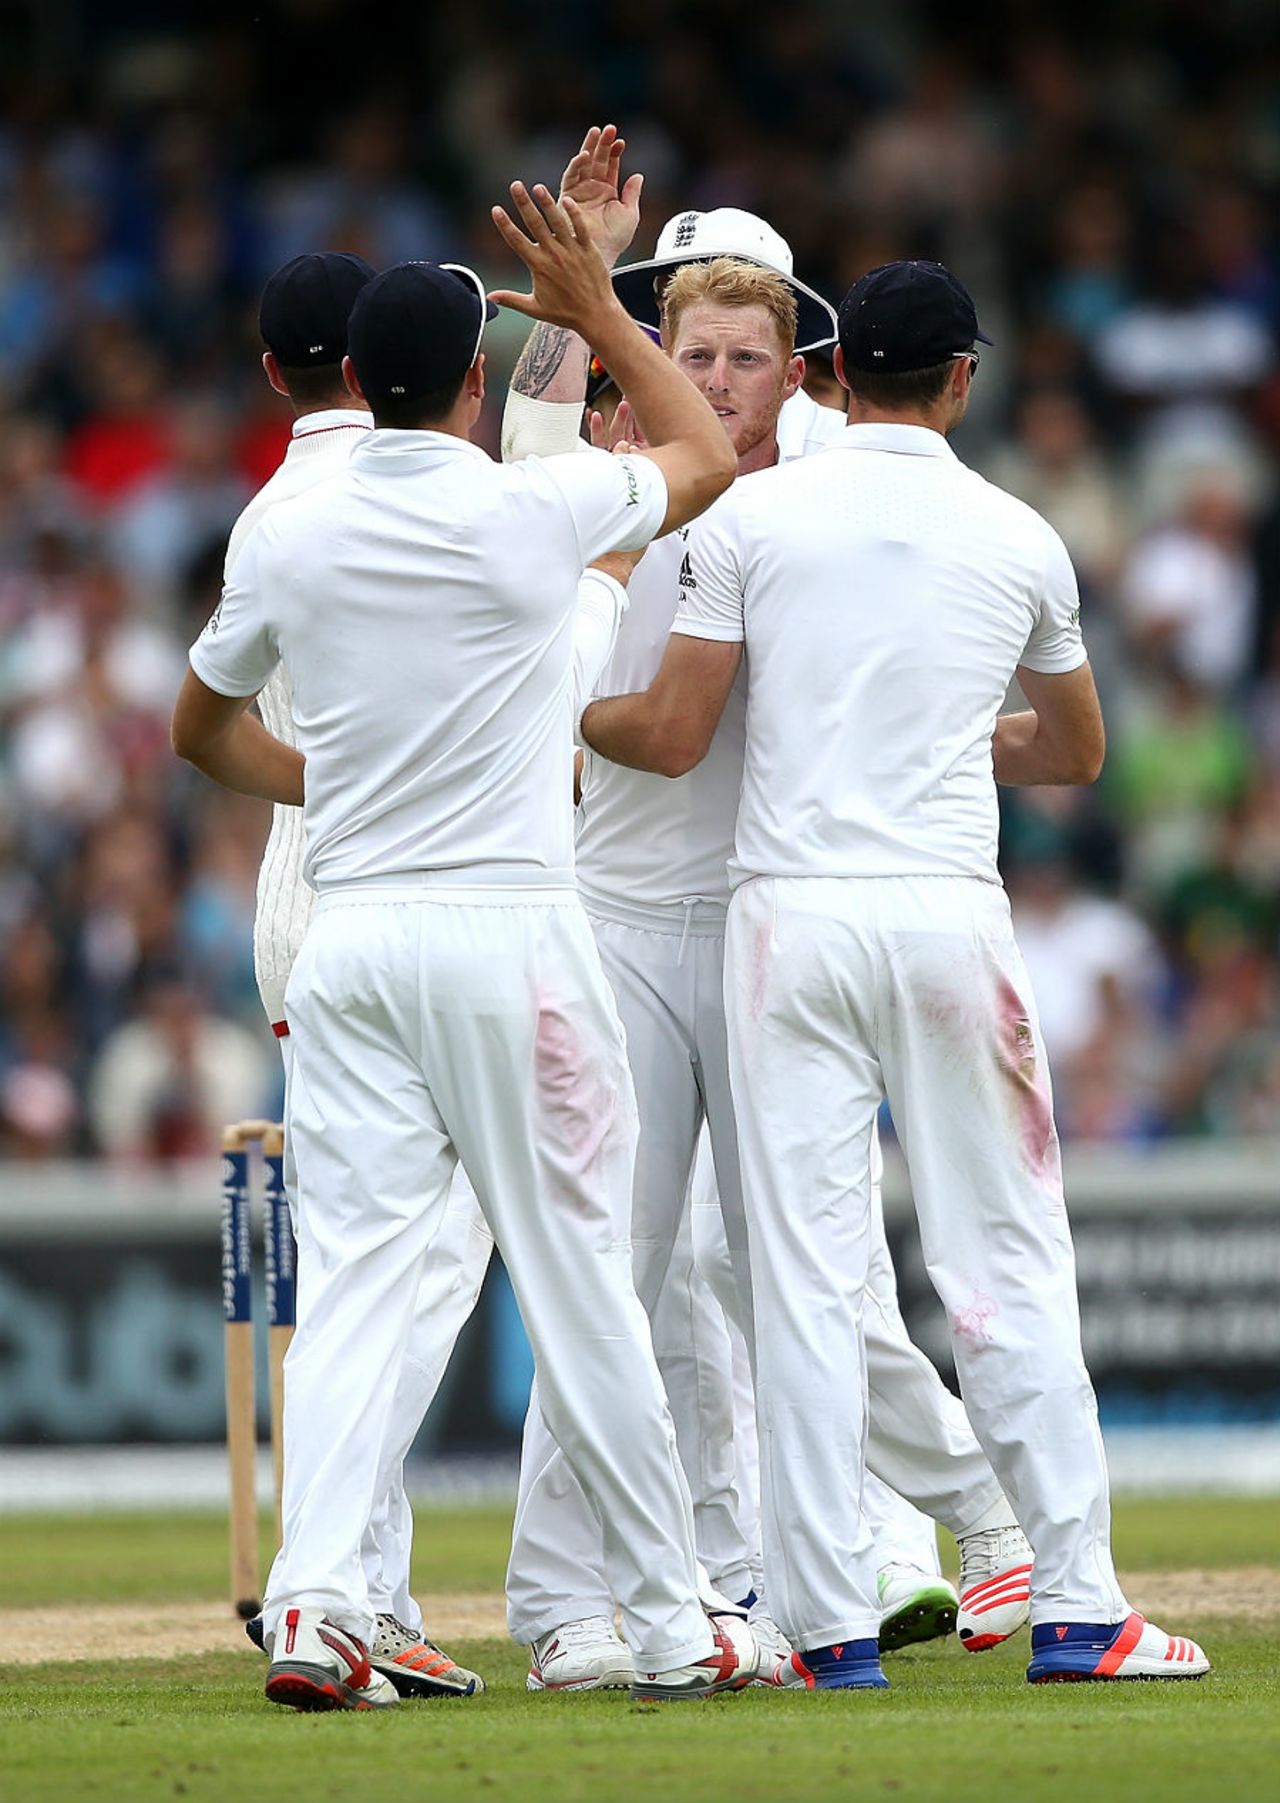 Ben Stokes removed Sarfraz Ahmed for 26, England v Pakistan, 2nd Investec Test, Old Trafford, 3rd day, July 24, 2016